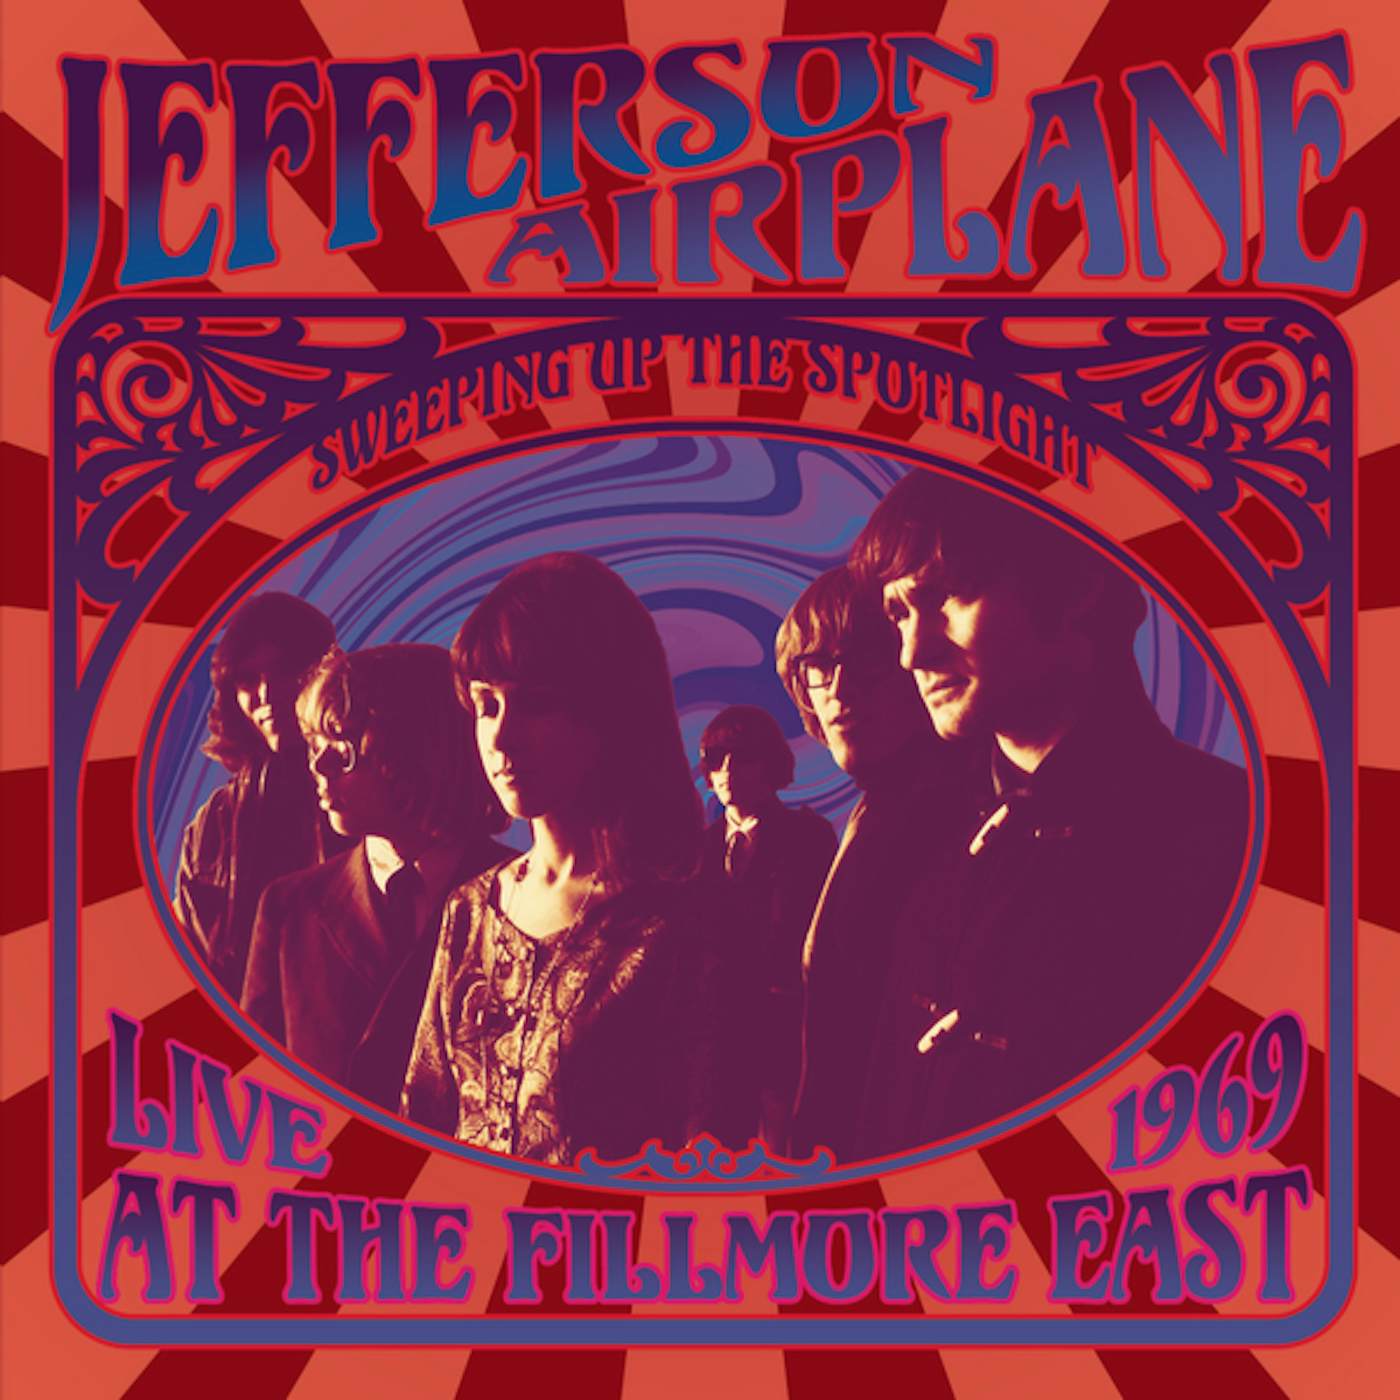 Jefferson Airplane LIVE AT FILLMORE EAST 1969: SWEEPING UP SPOTLIGHT CD